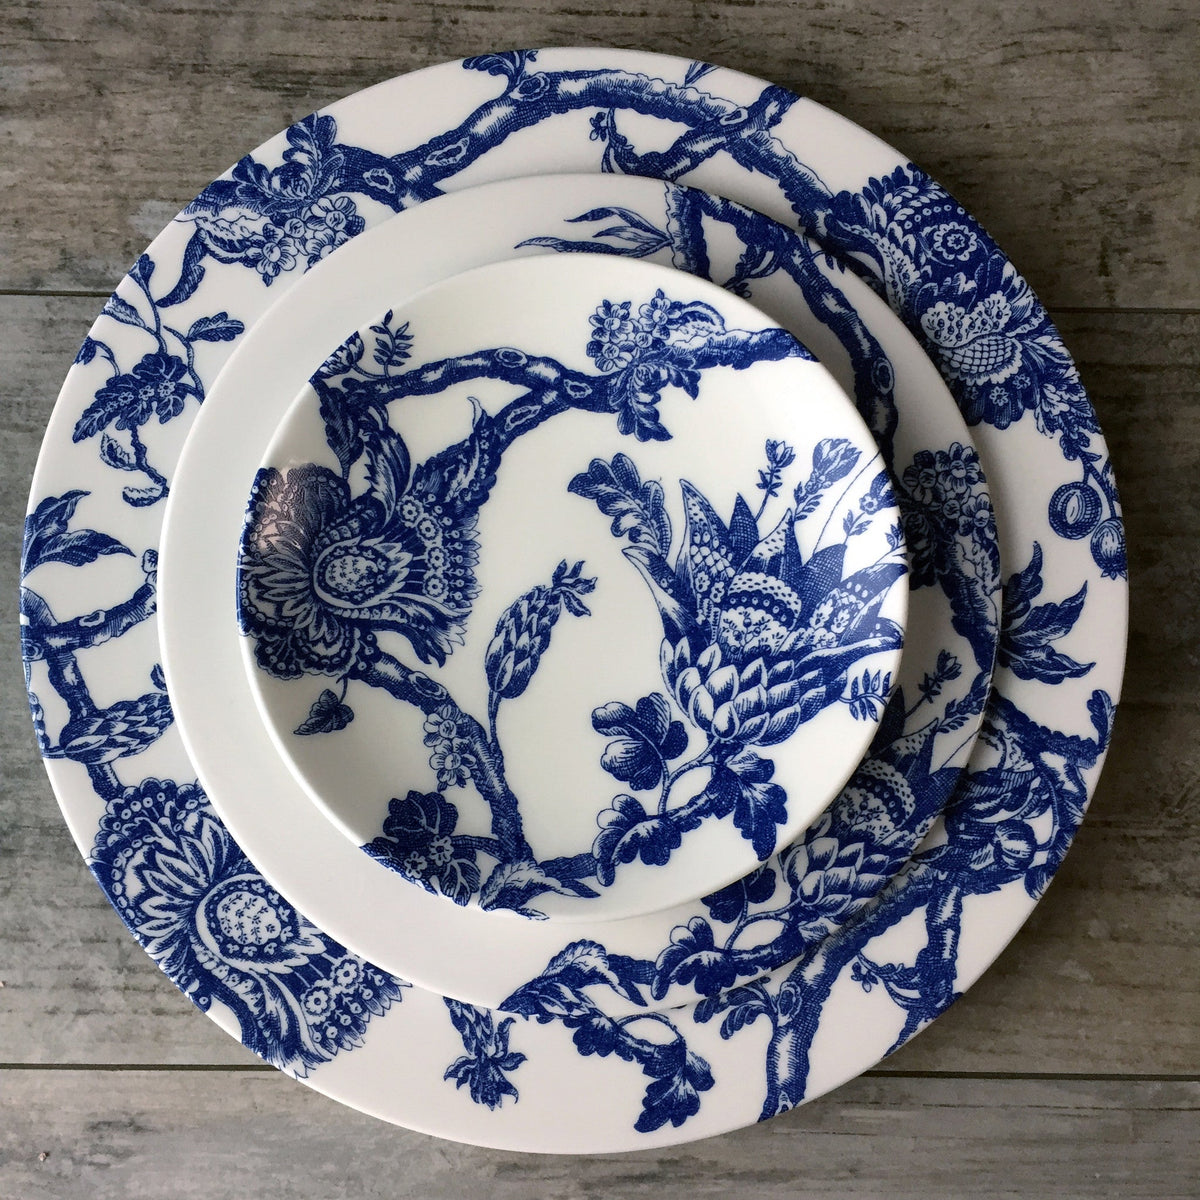 A set of blue and white porcelain plates with floral designs, including Arcadia Salad Plates from Caskata Artisanal Home.